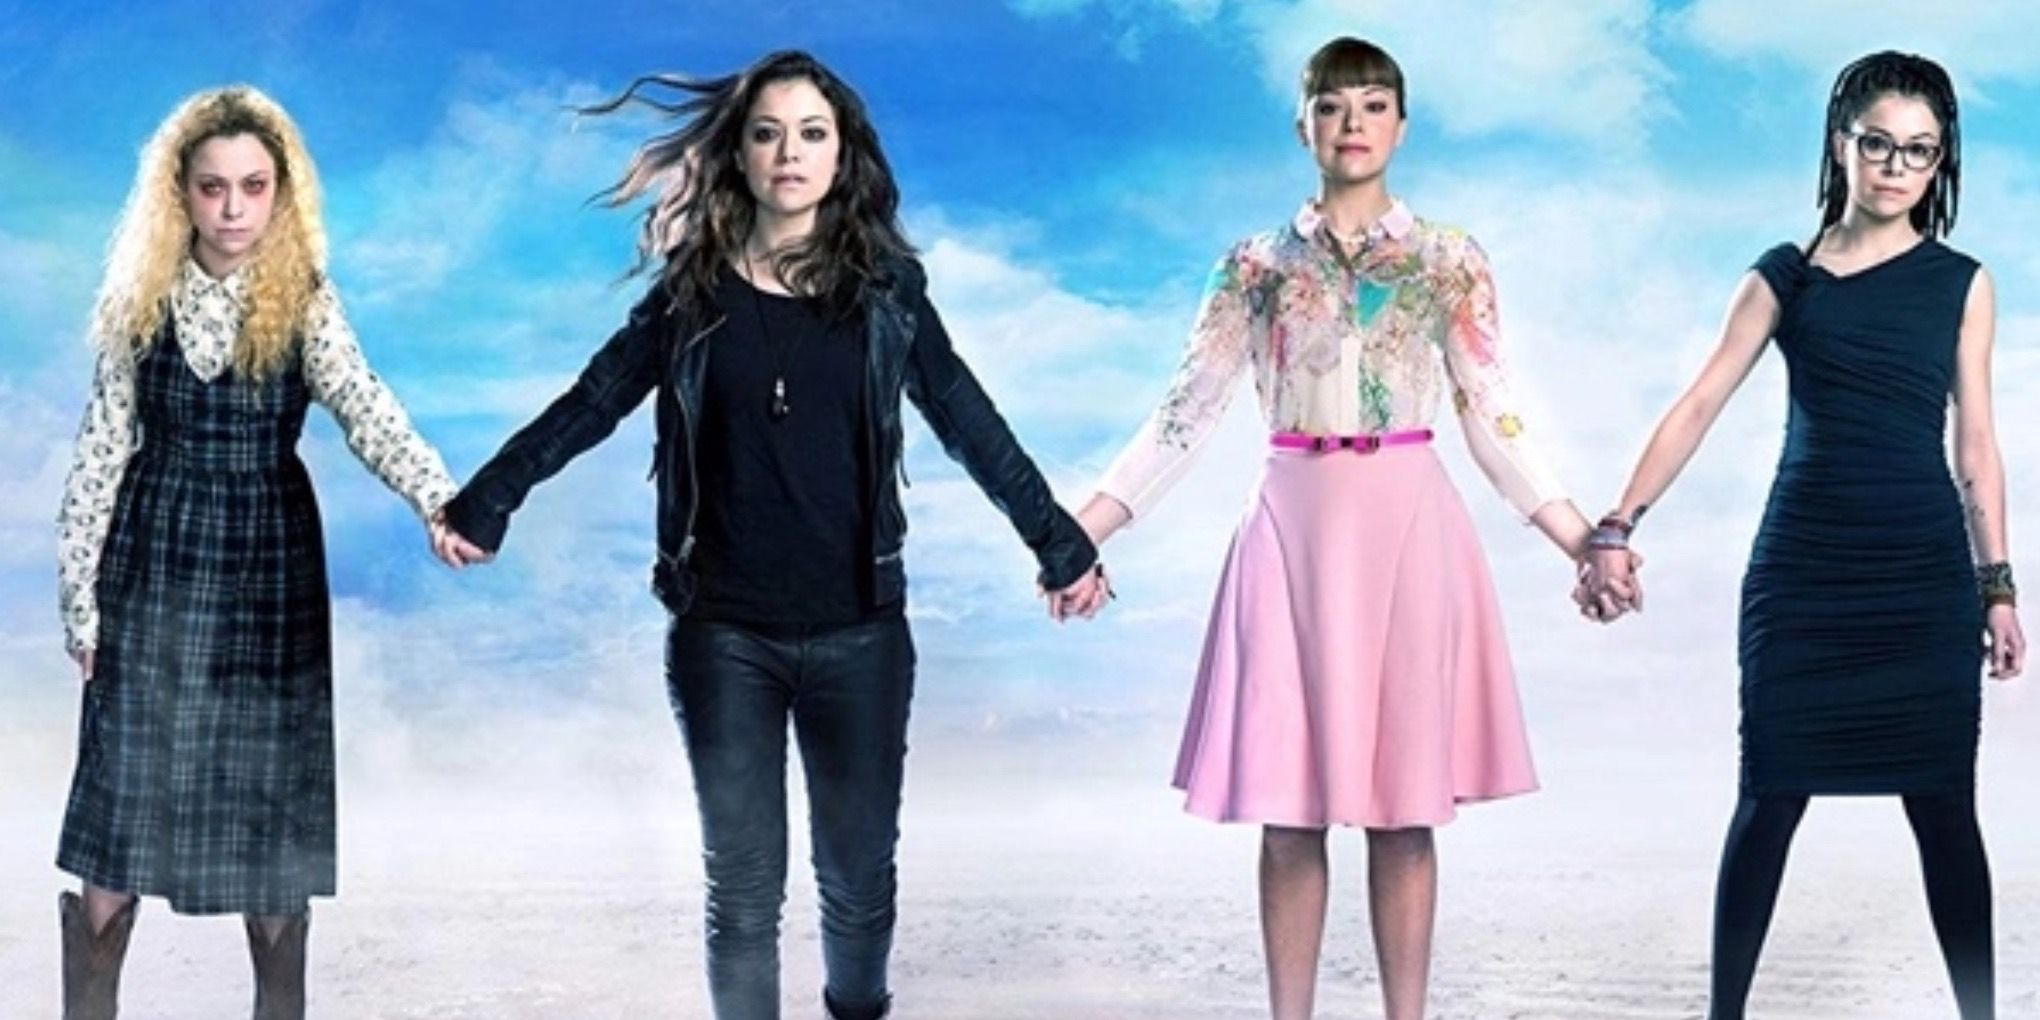 The different clones holding hands together in Orphan Black (2013-2017)